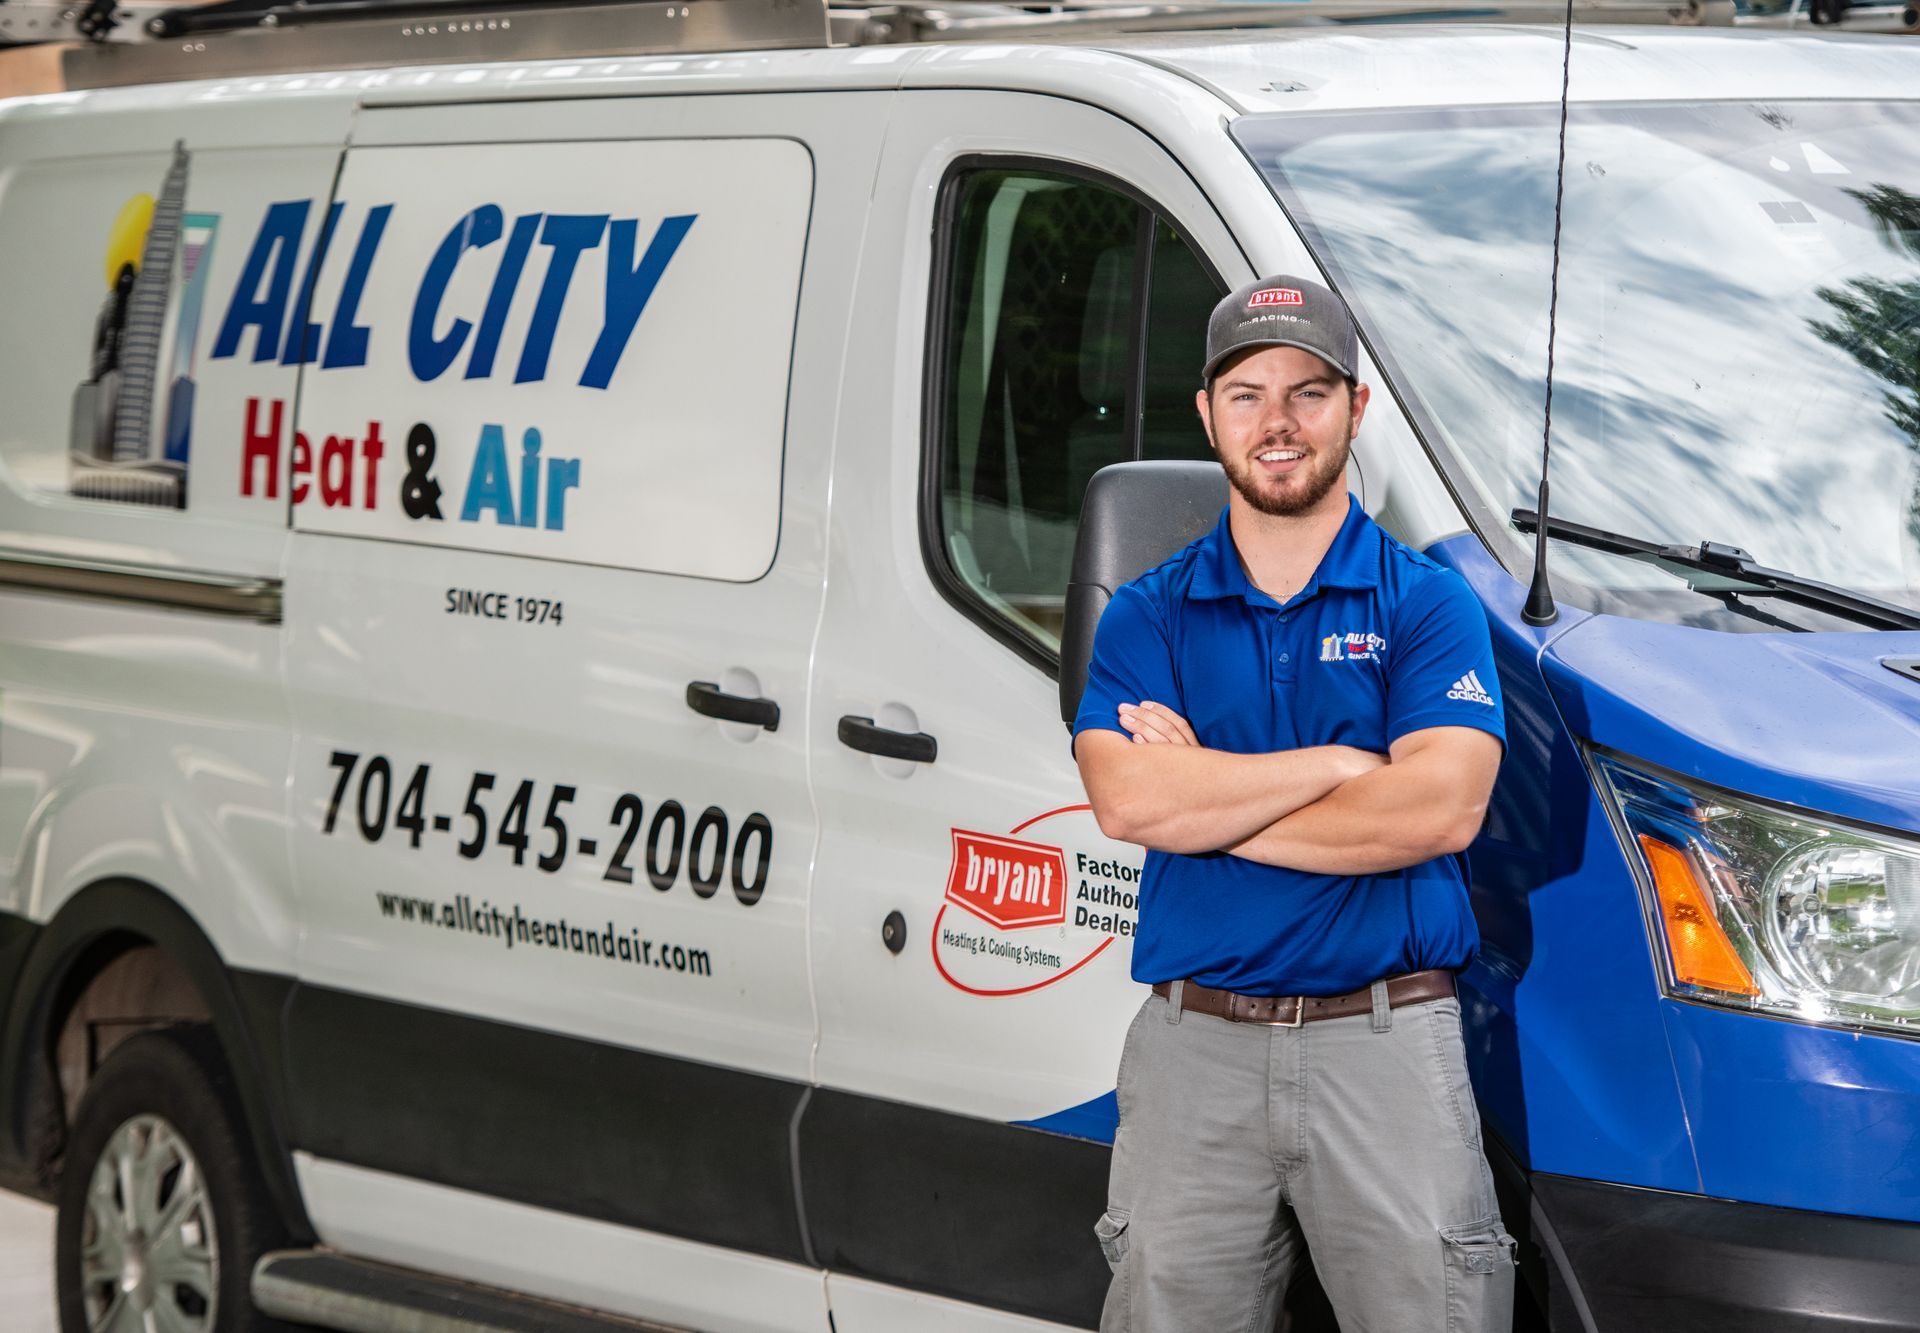 An All City Heat and Air technician is standing in front of an All City Heat and Air van.